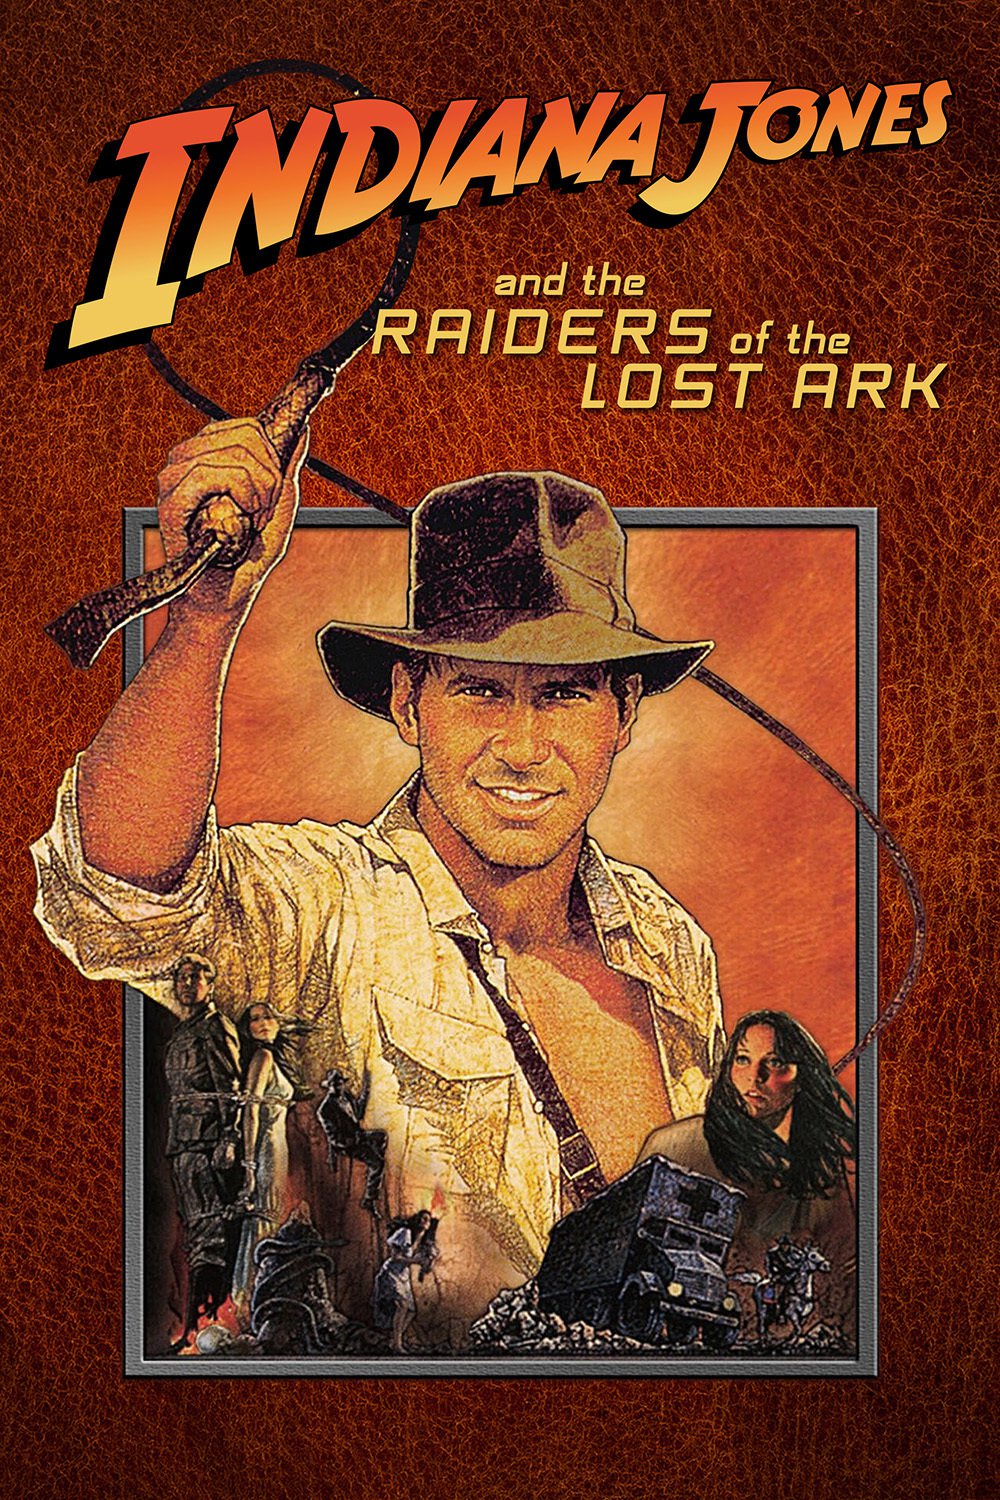 Raiders of the Lost Ark Shat the Movies